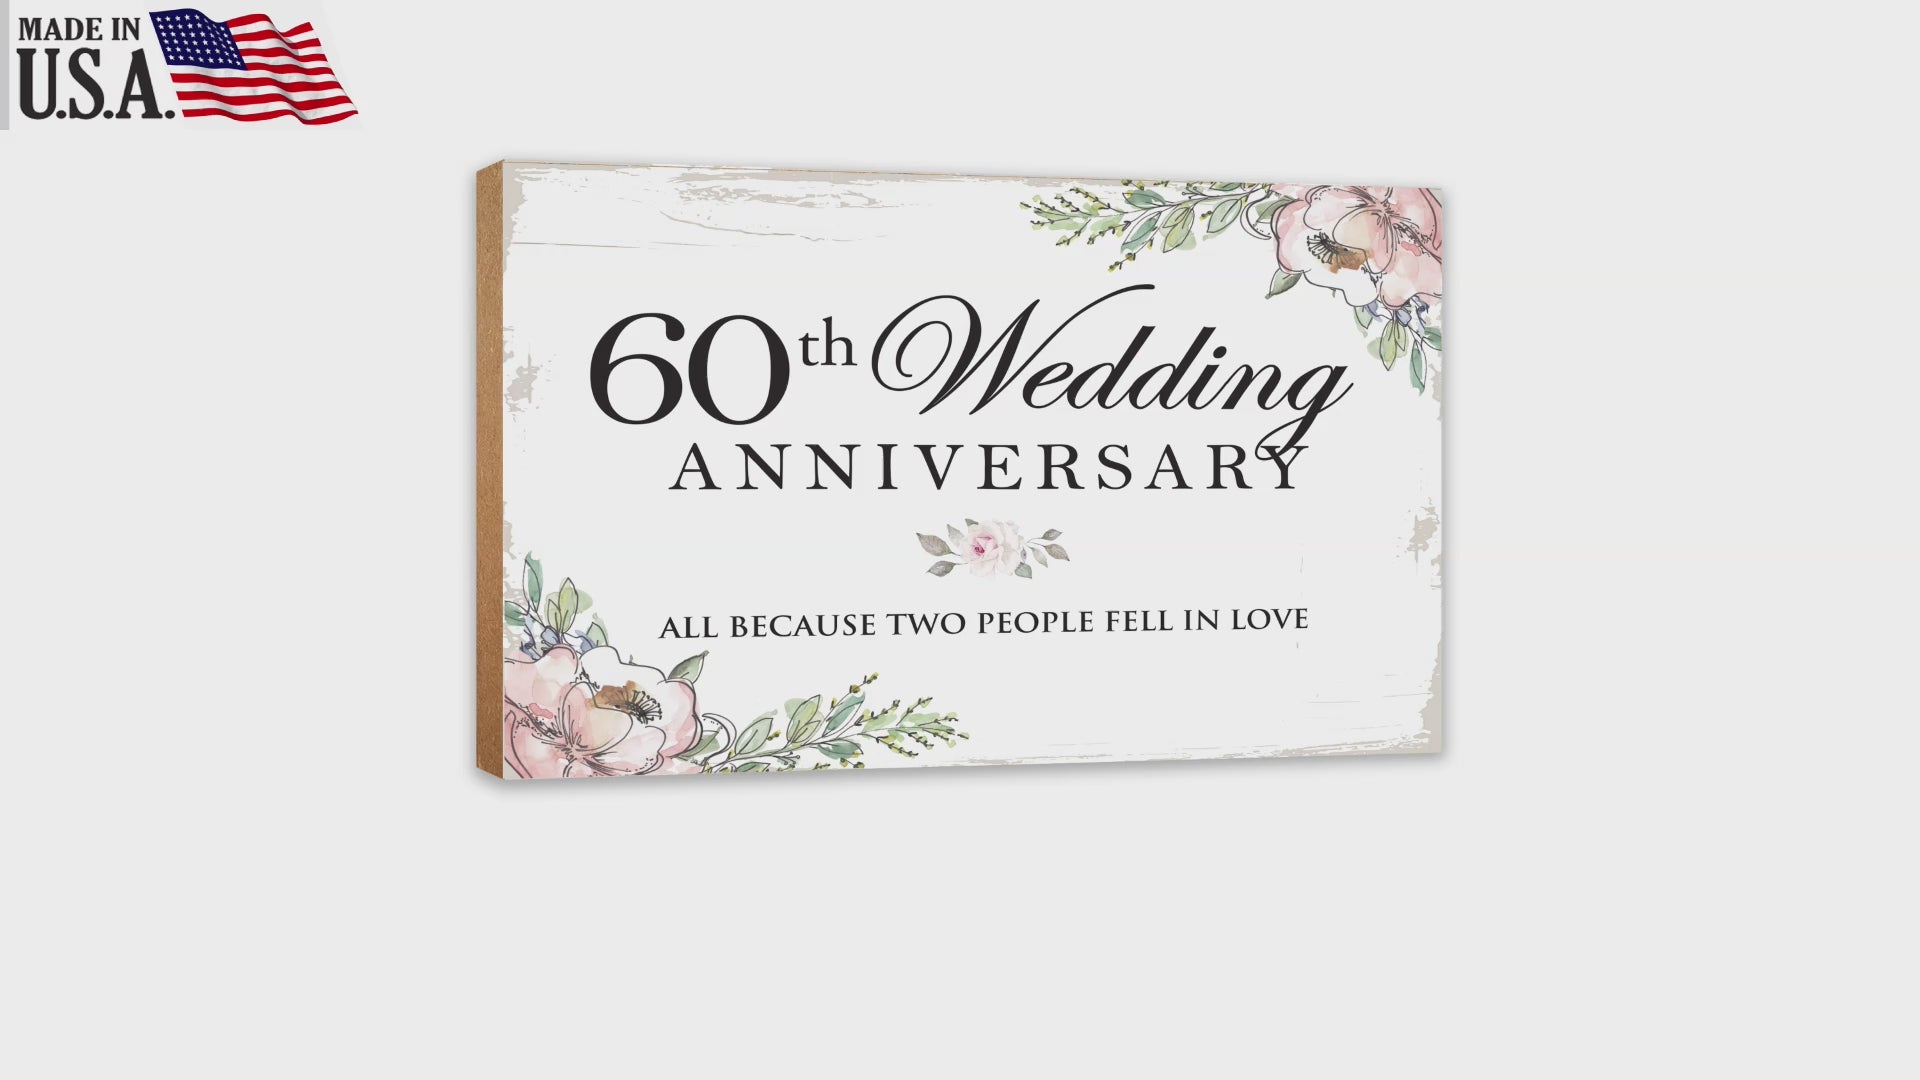 60th Wedding Anniversary Unique Shelf Decor and Tabletop Signs Gift for Couples - Fell In Love